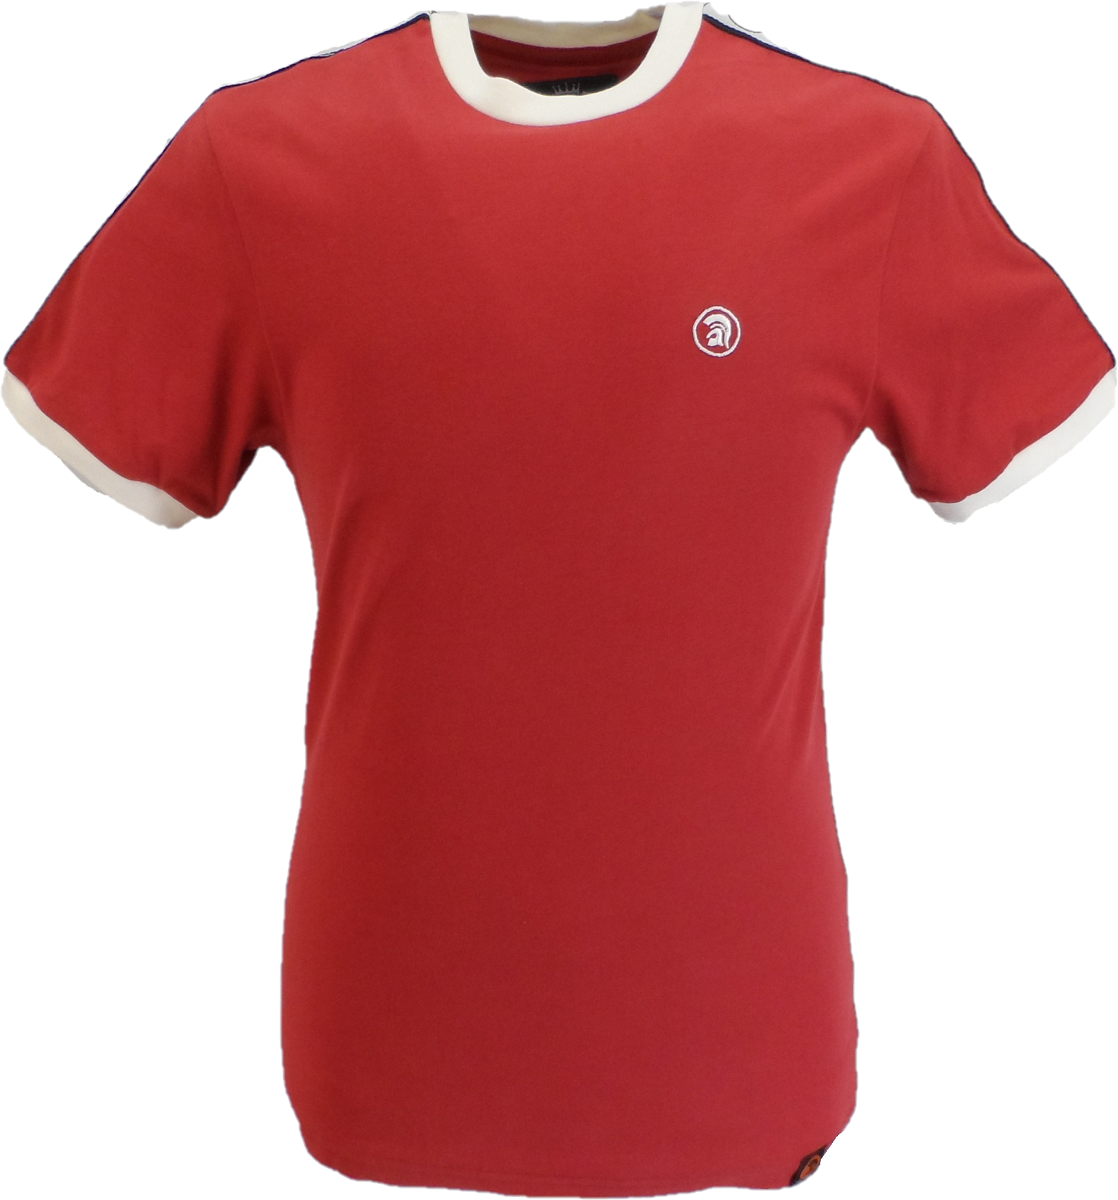 Trojan Records Mens Red Taped Sleeve Cotton Ringer T-Shirt